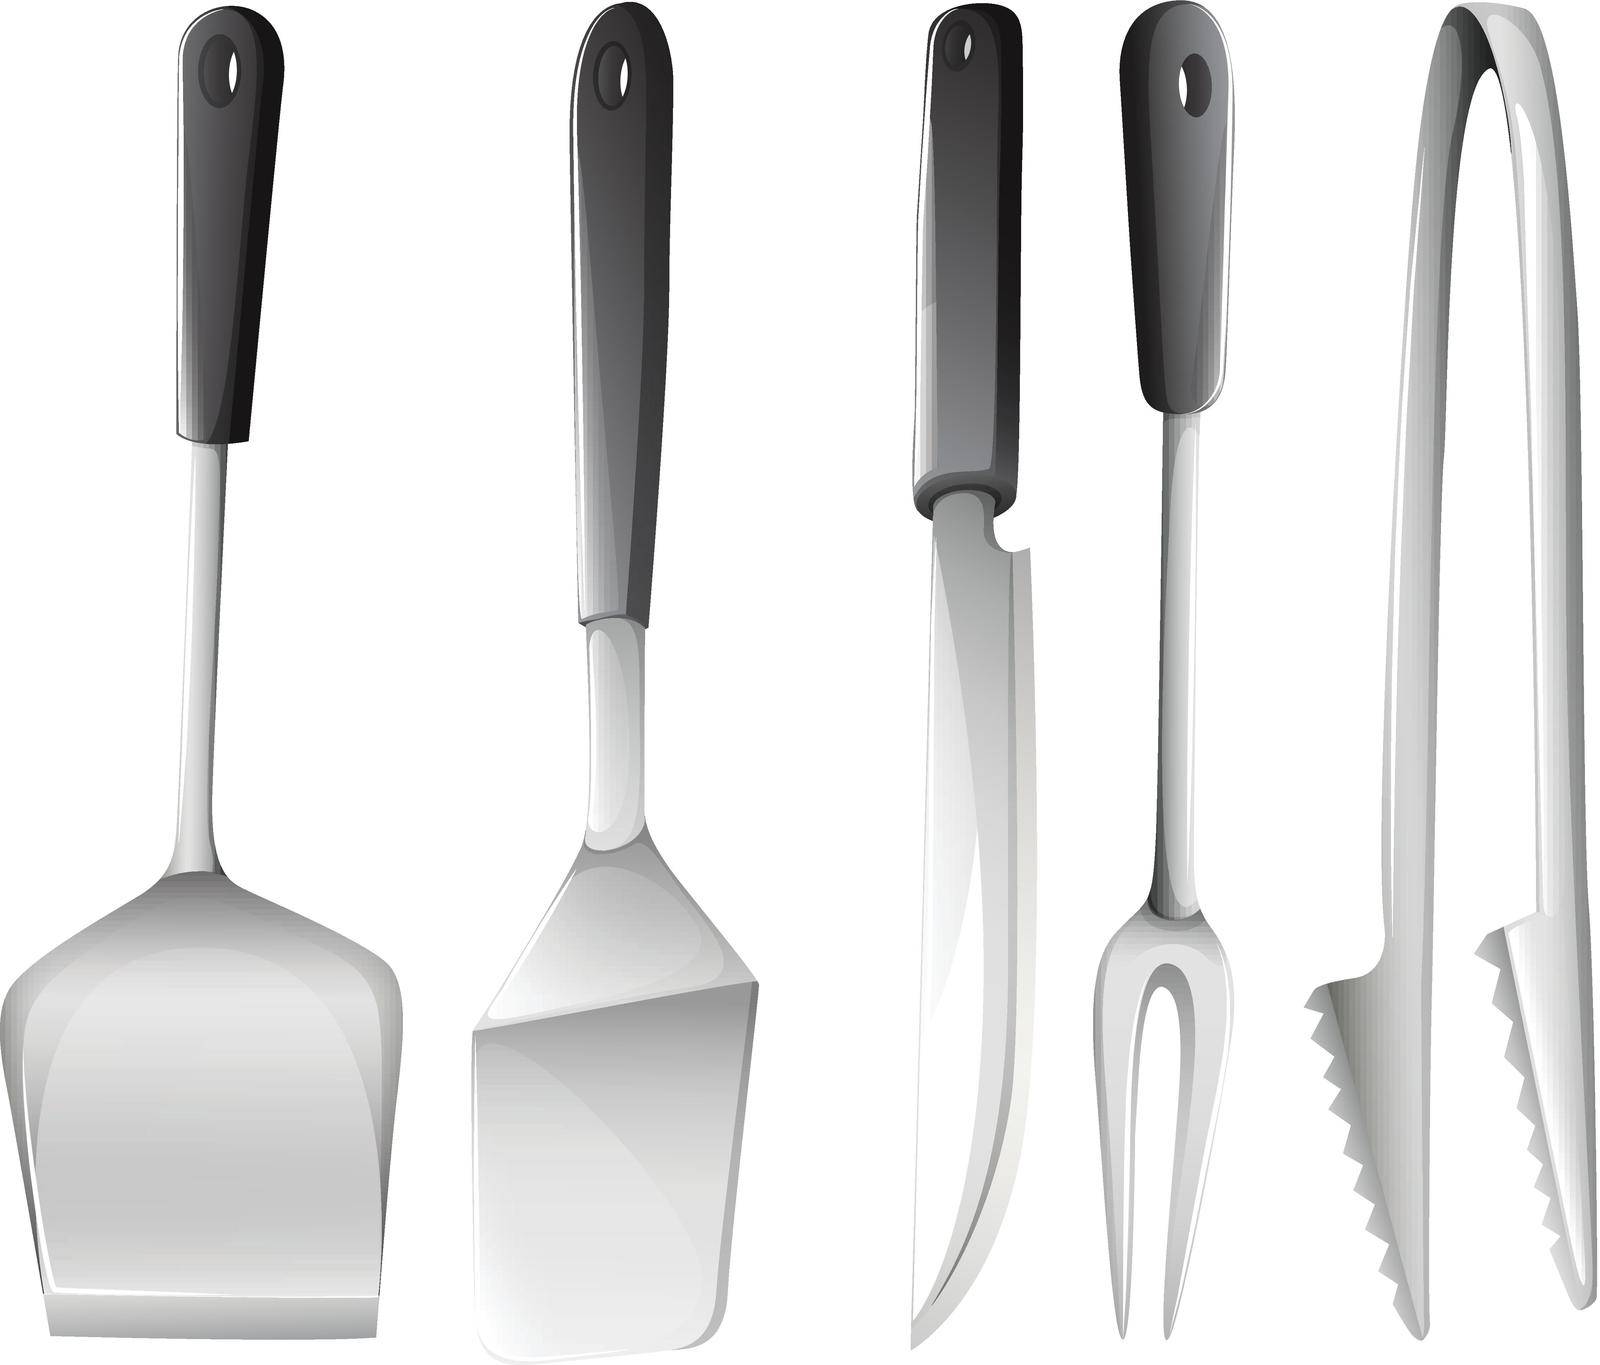 Illustration of the different cooking utensils on a white background